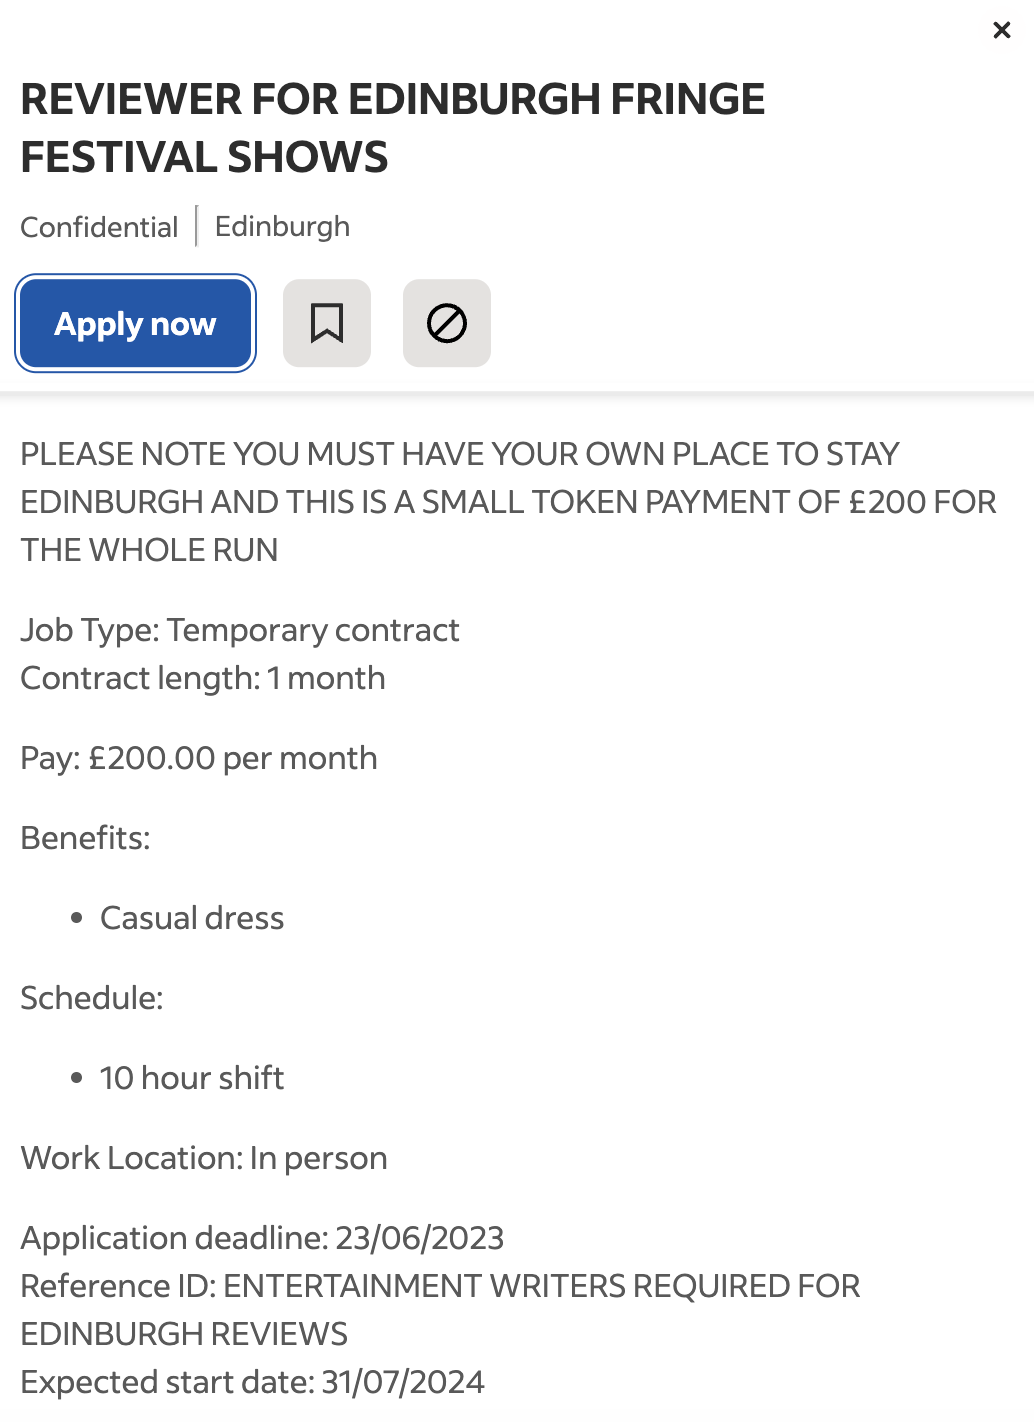 The ad specified 10 hour shifts in exchange for a £200 ‘token payment’ monthly wage